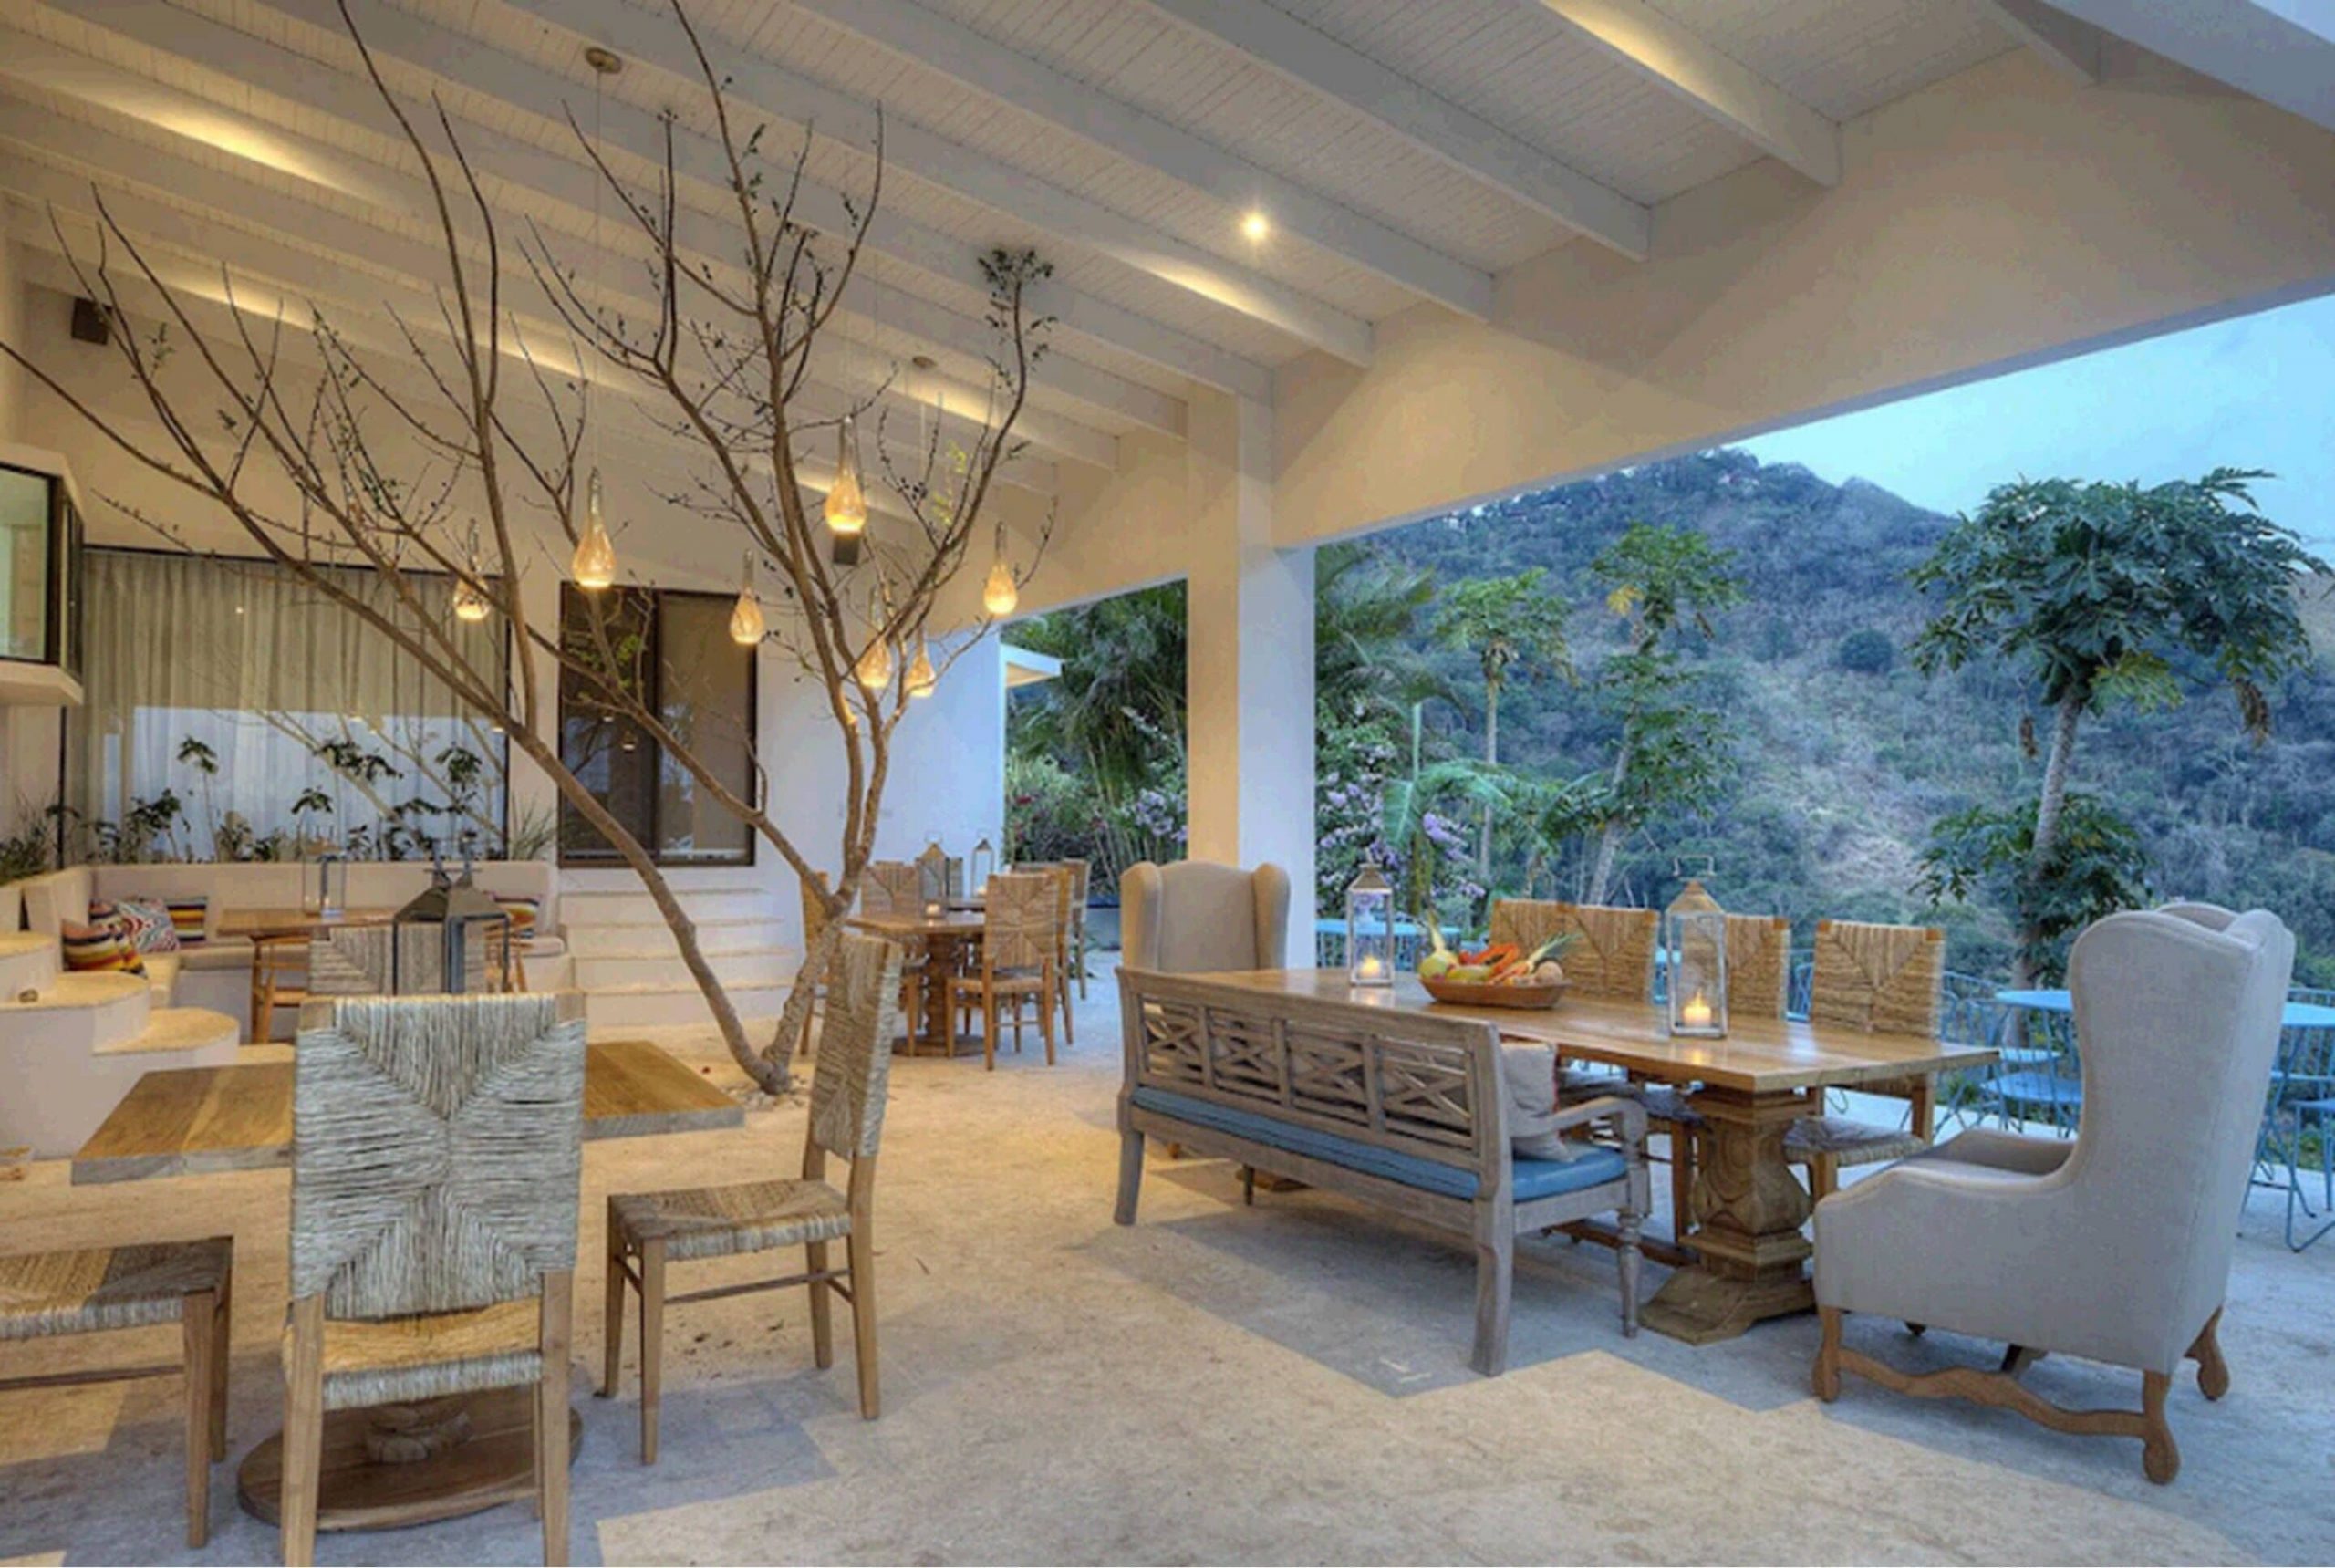 Then outdoor dining area for guests is designed with upscale furniture and beautiful wooden rustic chairs on an indoor-outdoor patio with beautiful views for as far as the eye can see.